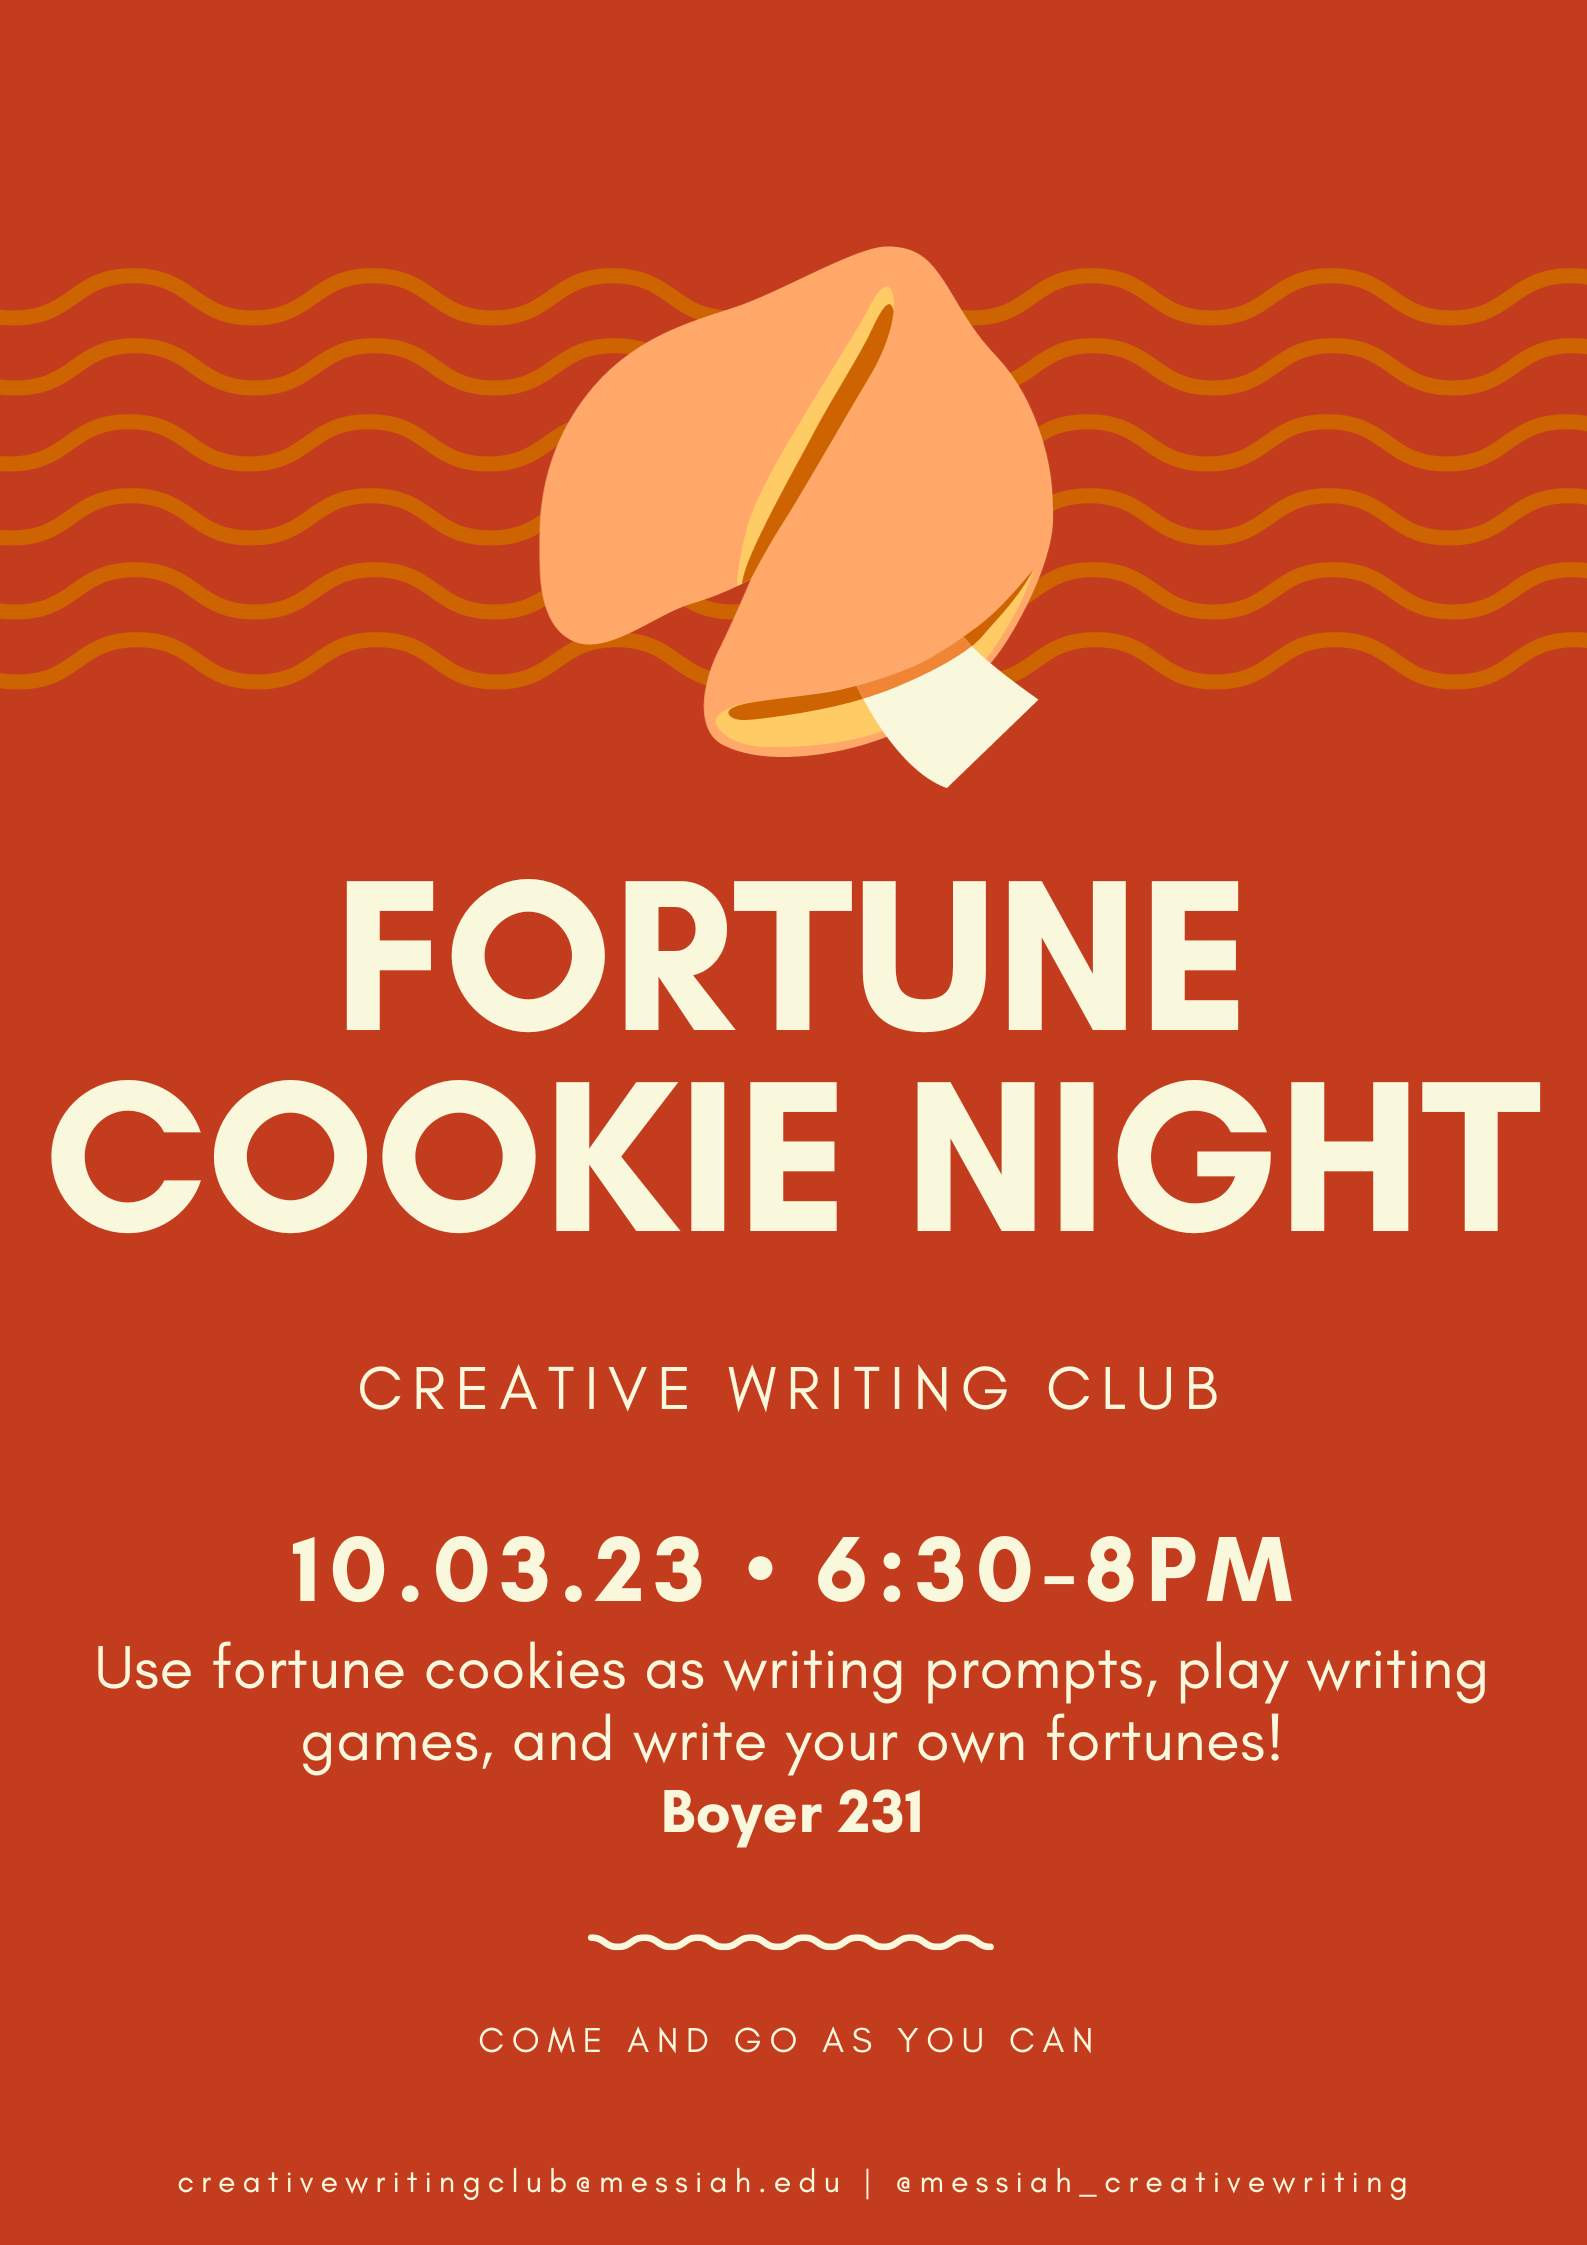 Fortune cookie night poster